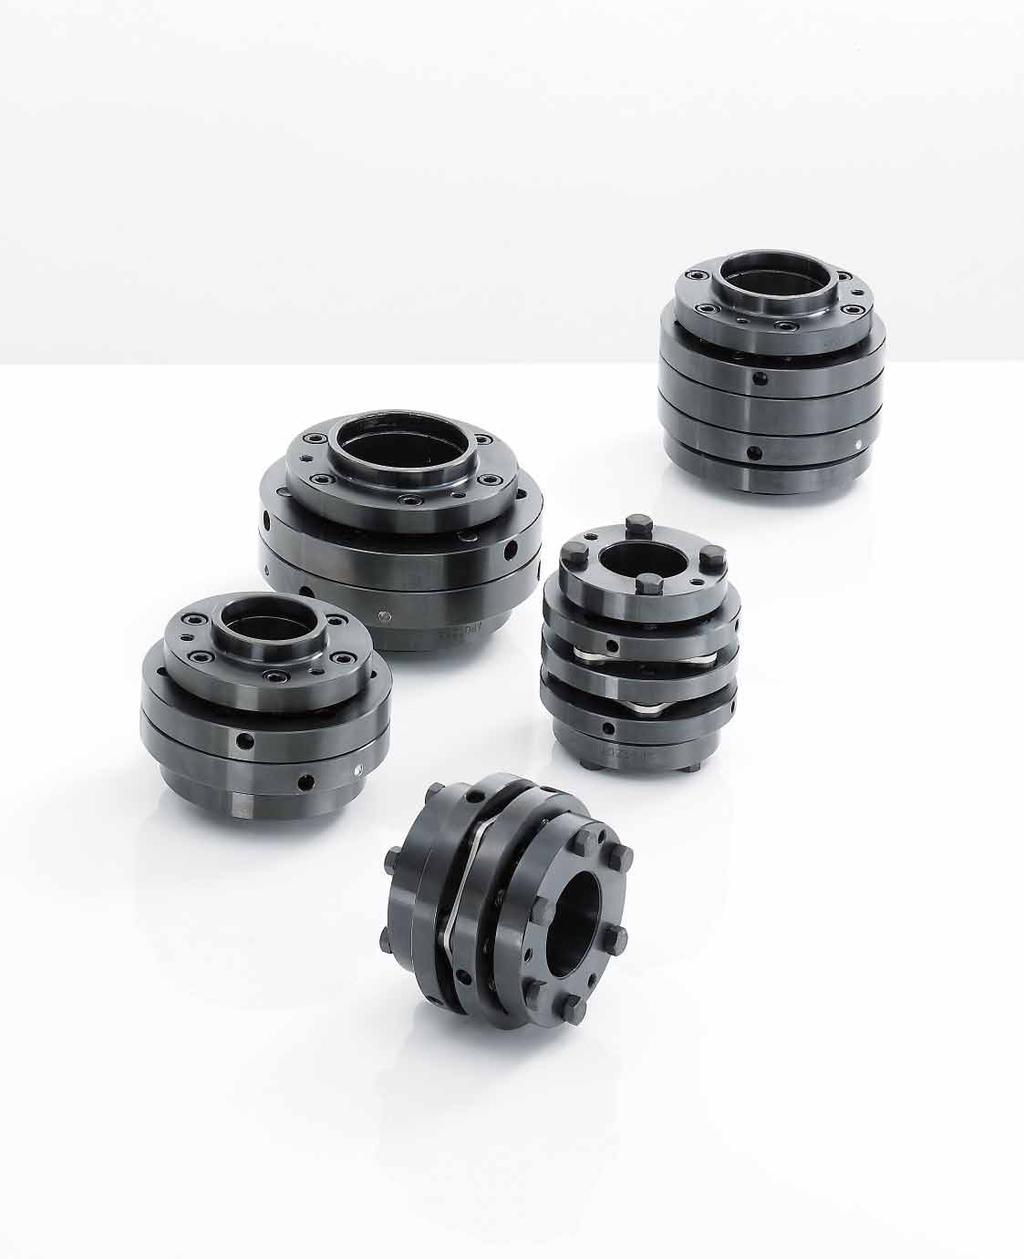 High-speed Rotation, High-precision Positioning The coupling specially designed for high-speed applications allows a maximum rotation speed of 20,000 min -1.